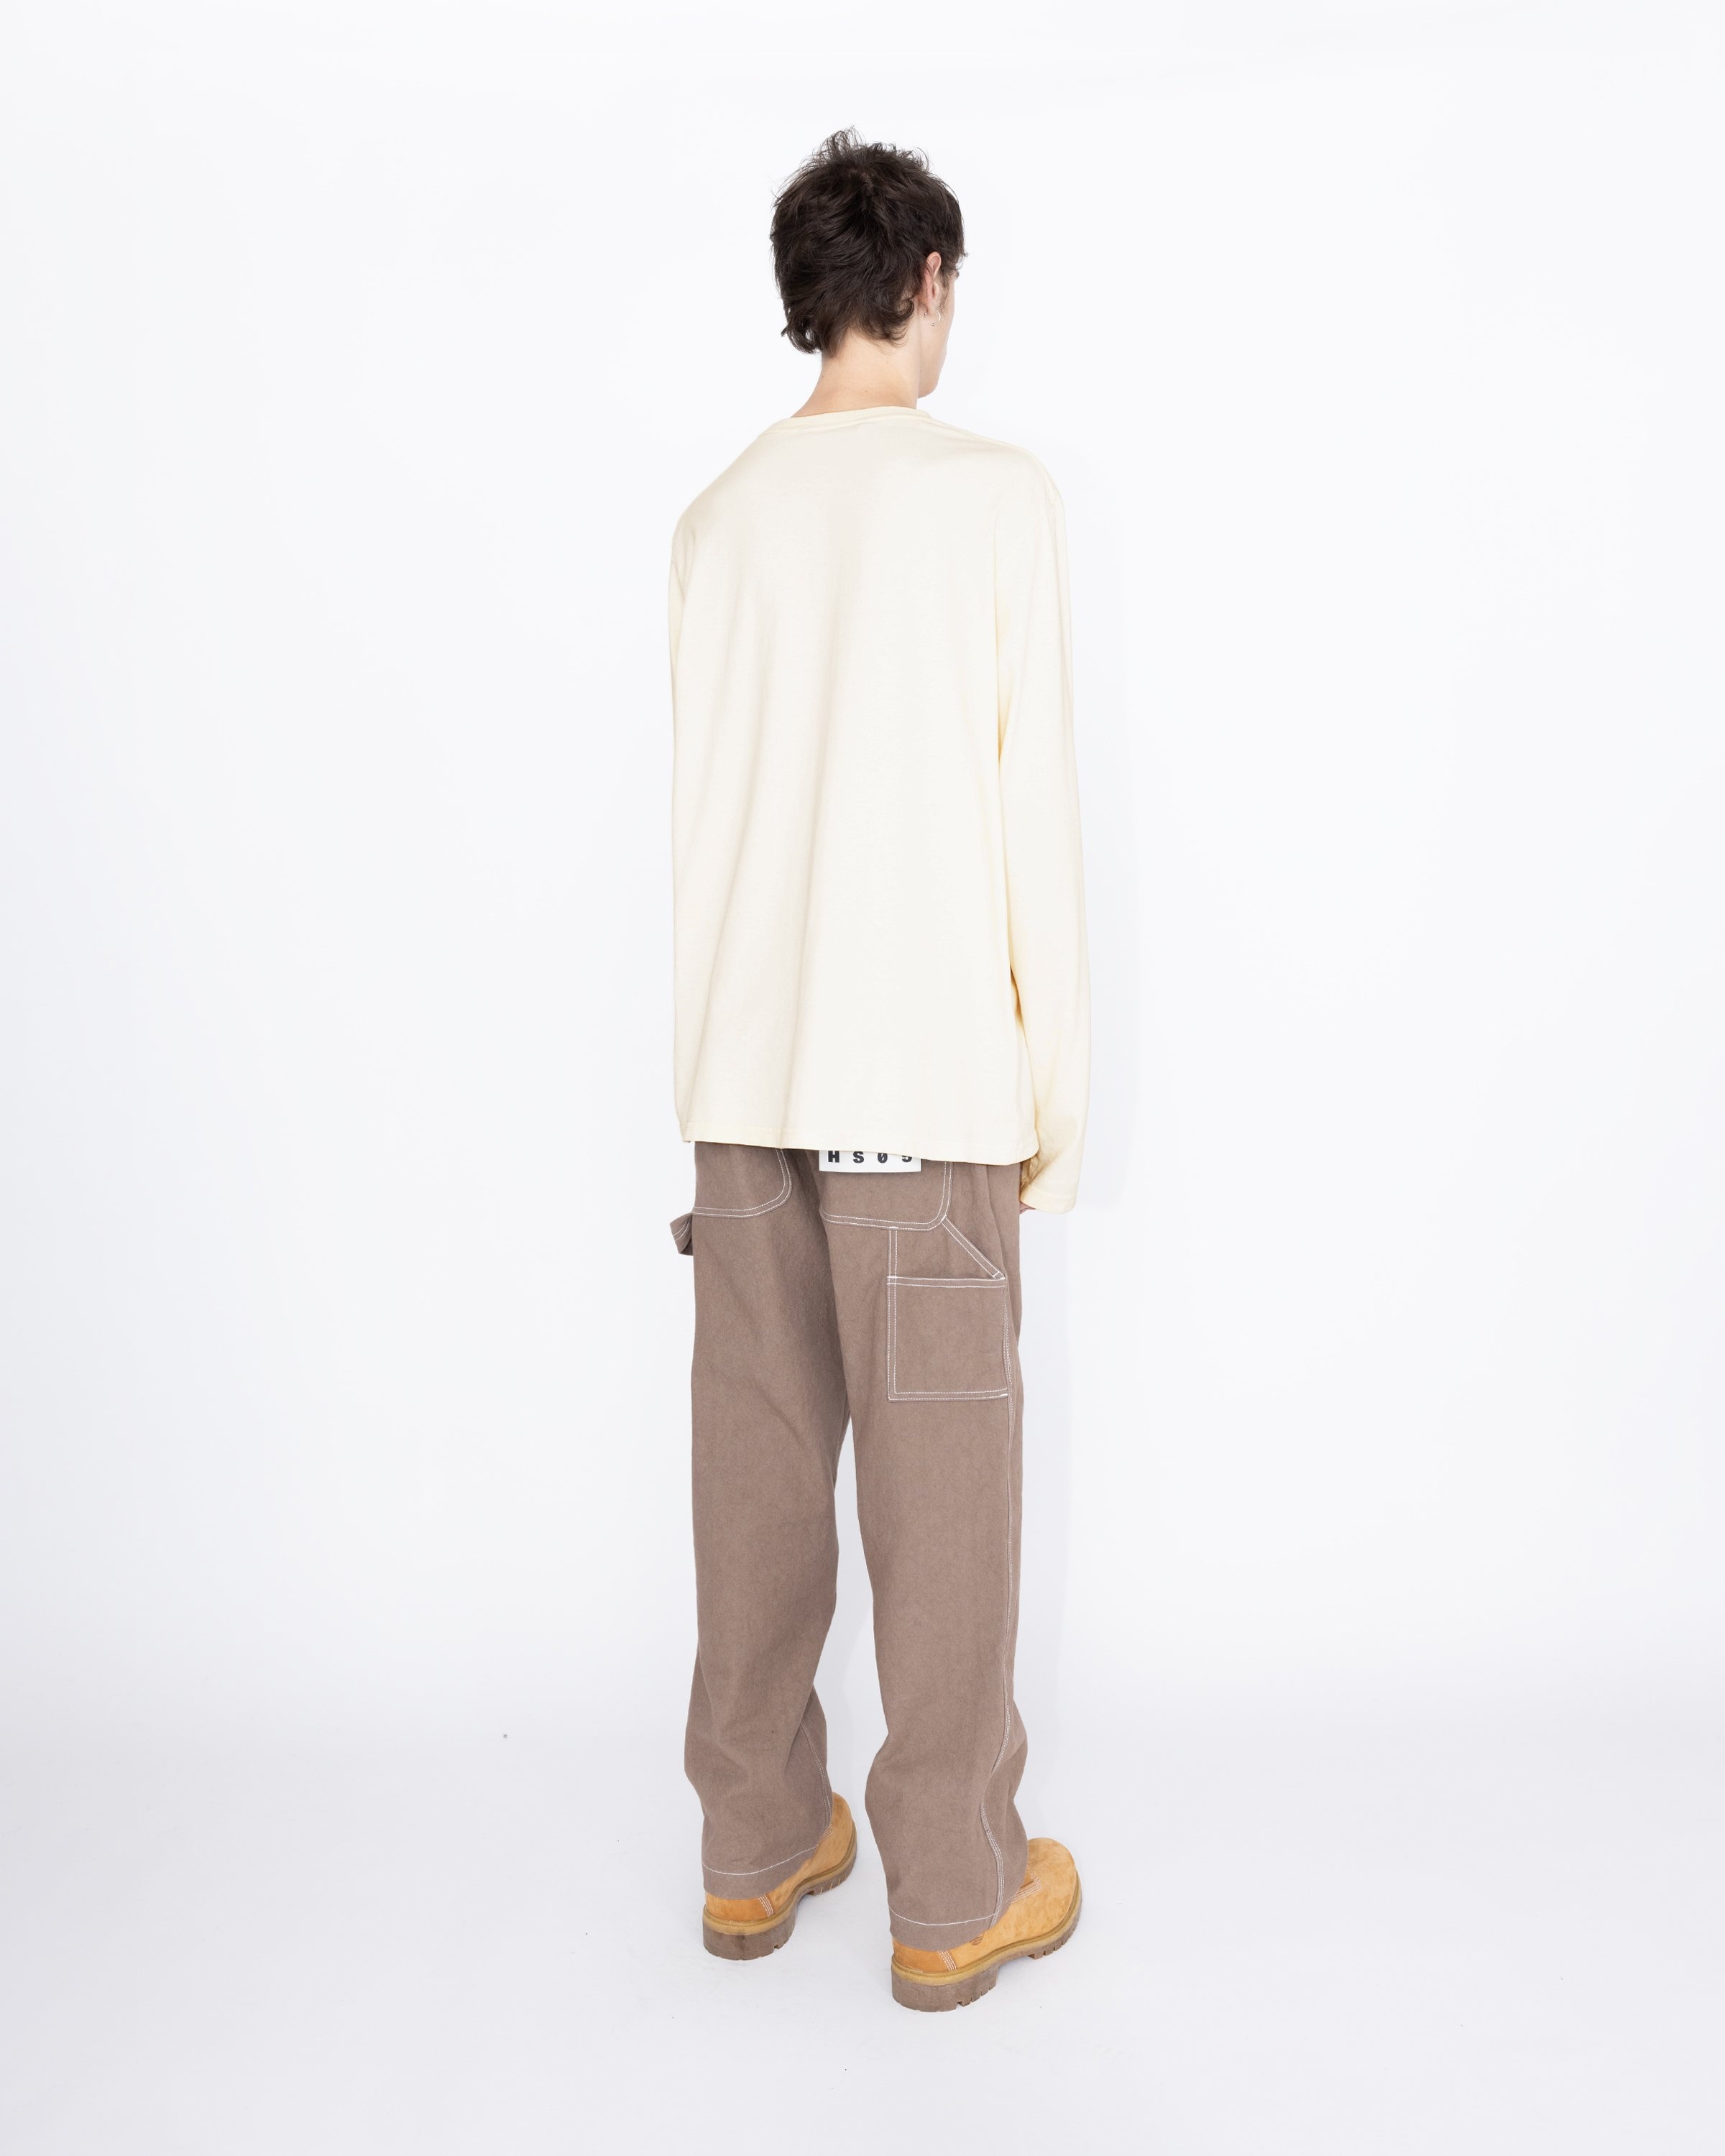 Highsnobiety HS05 – Pigment Dyed Boxy Long Sleeves Jersey Natural - Longsleeves - Beige - Image 5